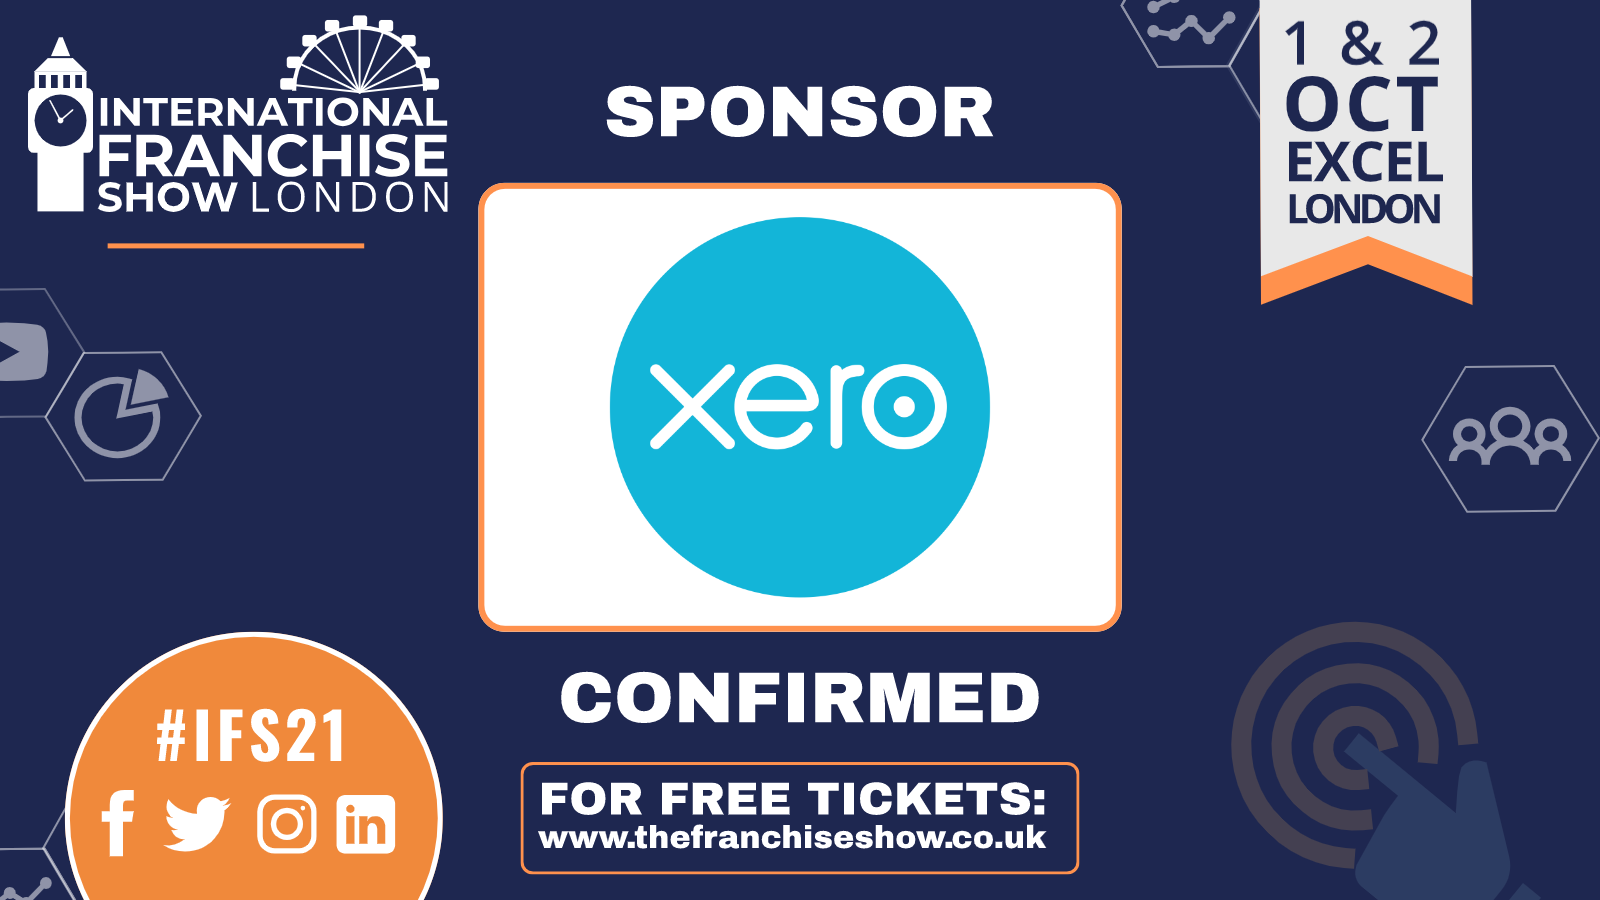 Xero sponsors the International Franchise Show for the upcoming event on 1st and 2nd October 2021.